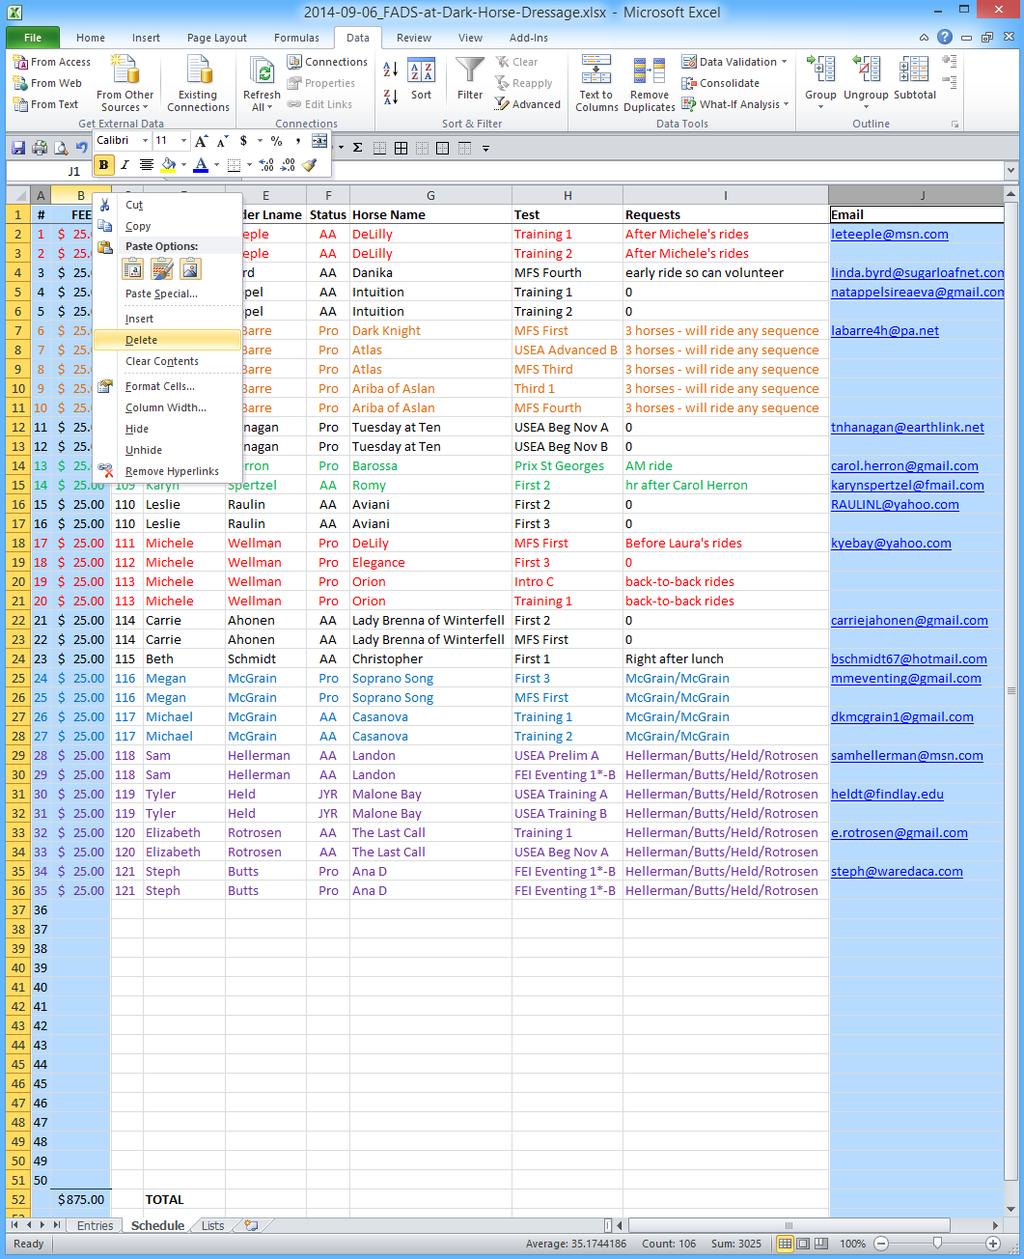 3. Using the ❶ Schedule spreadsheet, delete columns A (#), B (FEE) and J (Email) by ❷ highlighting the columns,